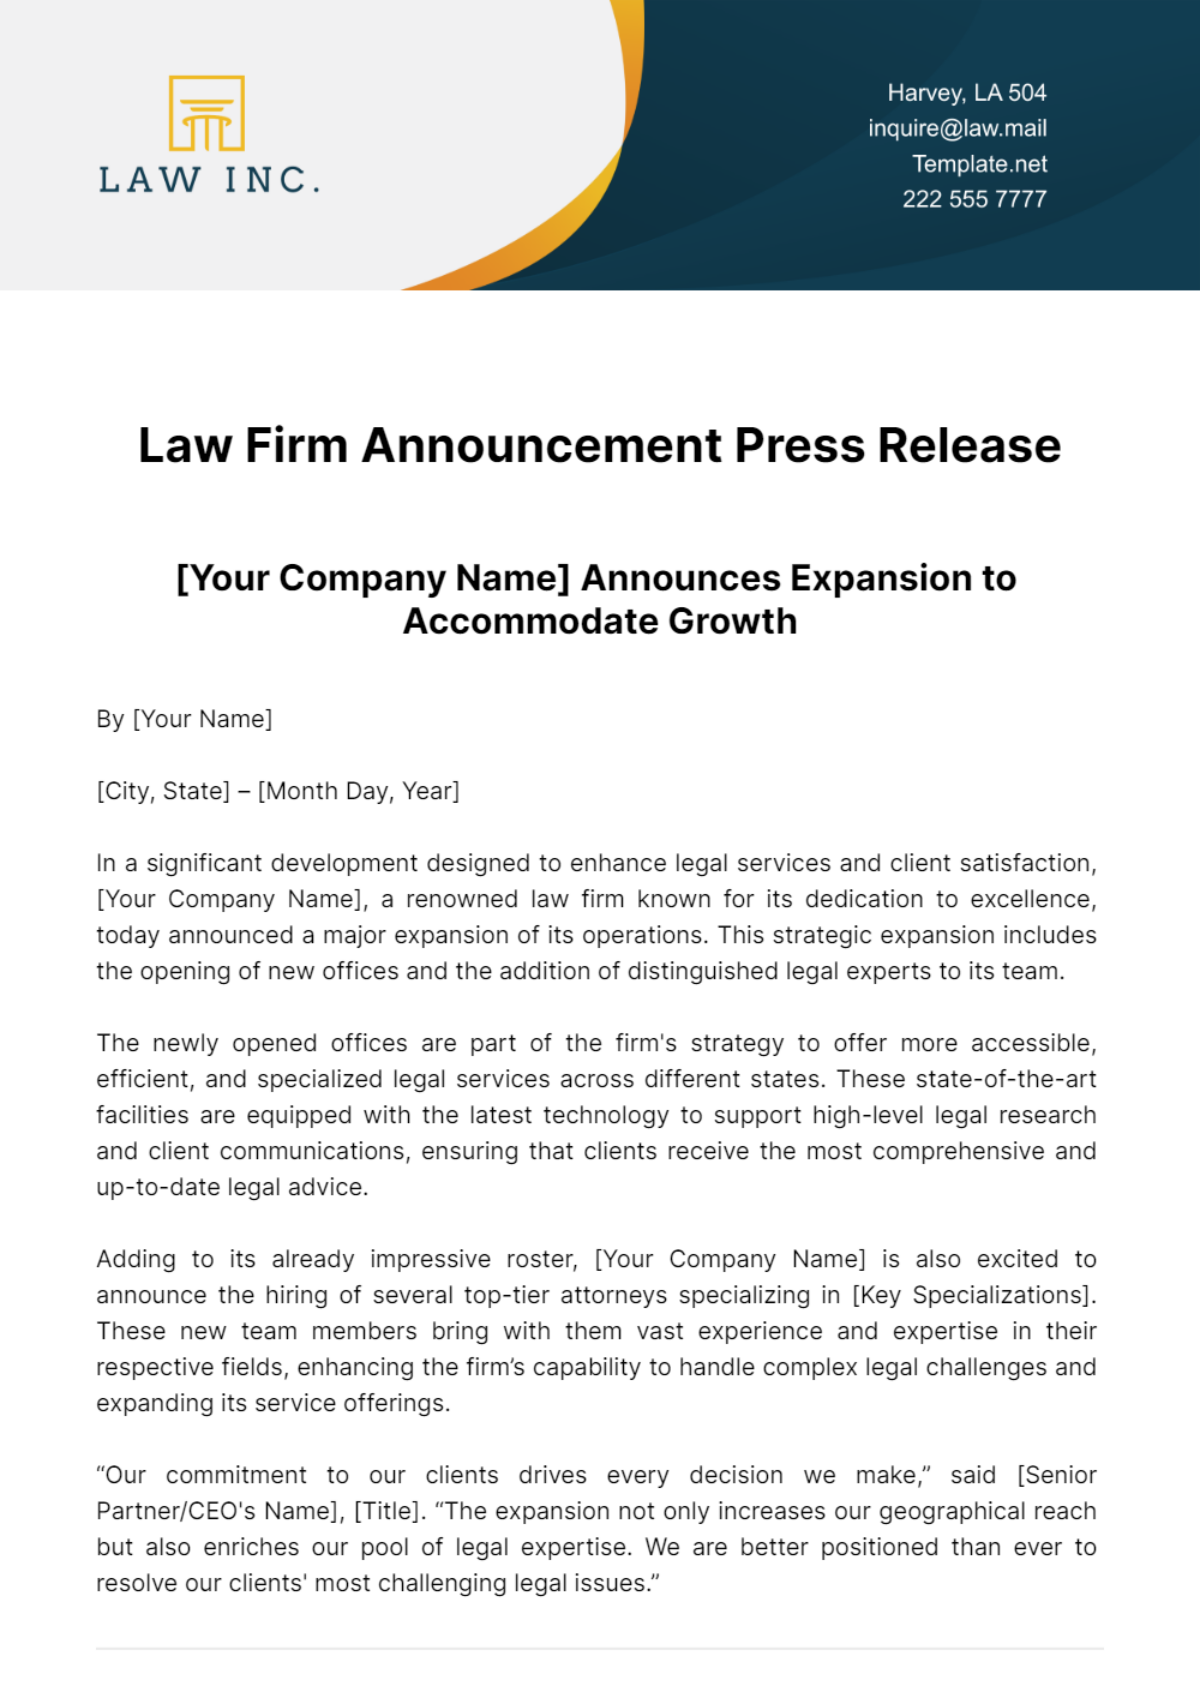 Law Firm Announcement Press Release Template